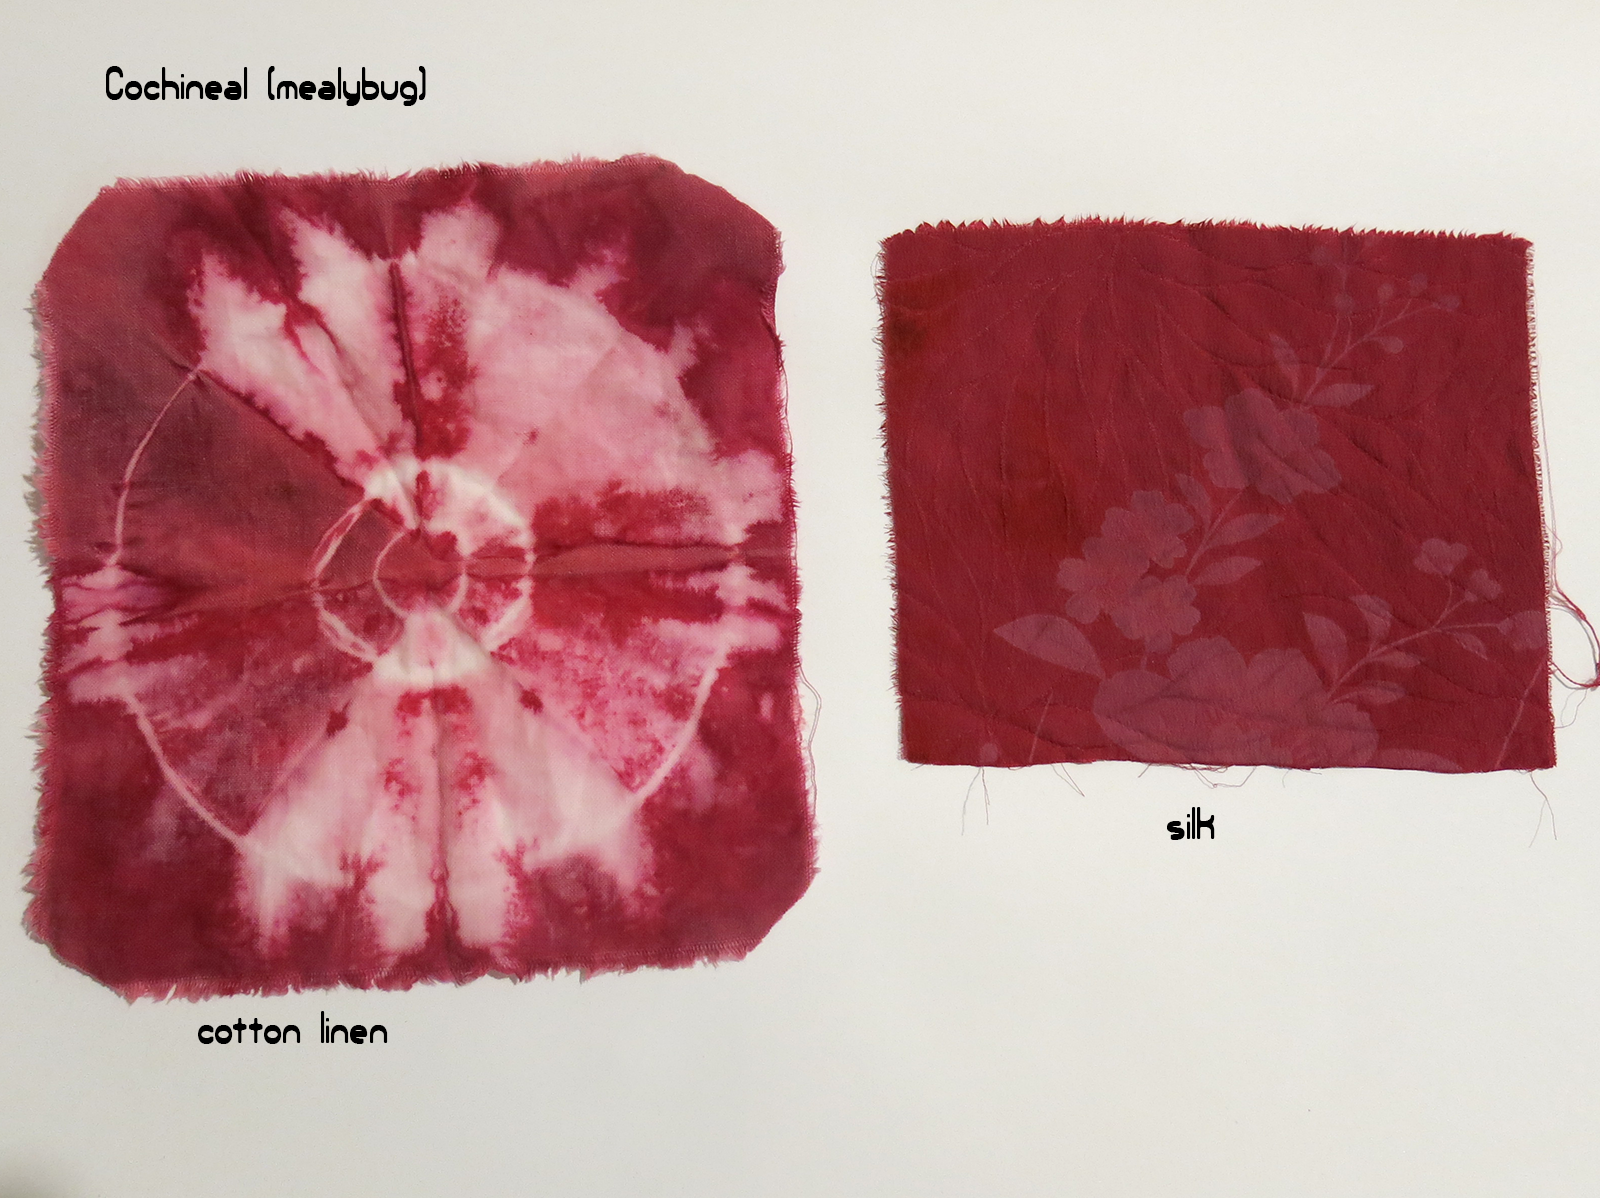 Rough cotton tie-dye and printed silk with cochnieal in iron/vinegar modifying bath (pH 3.5)